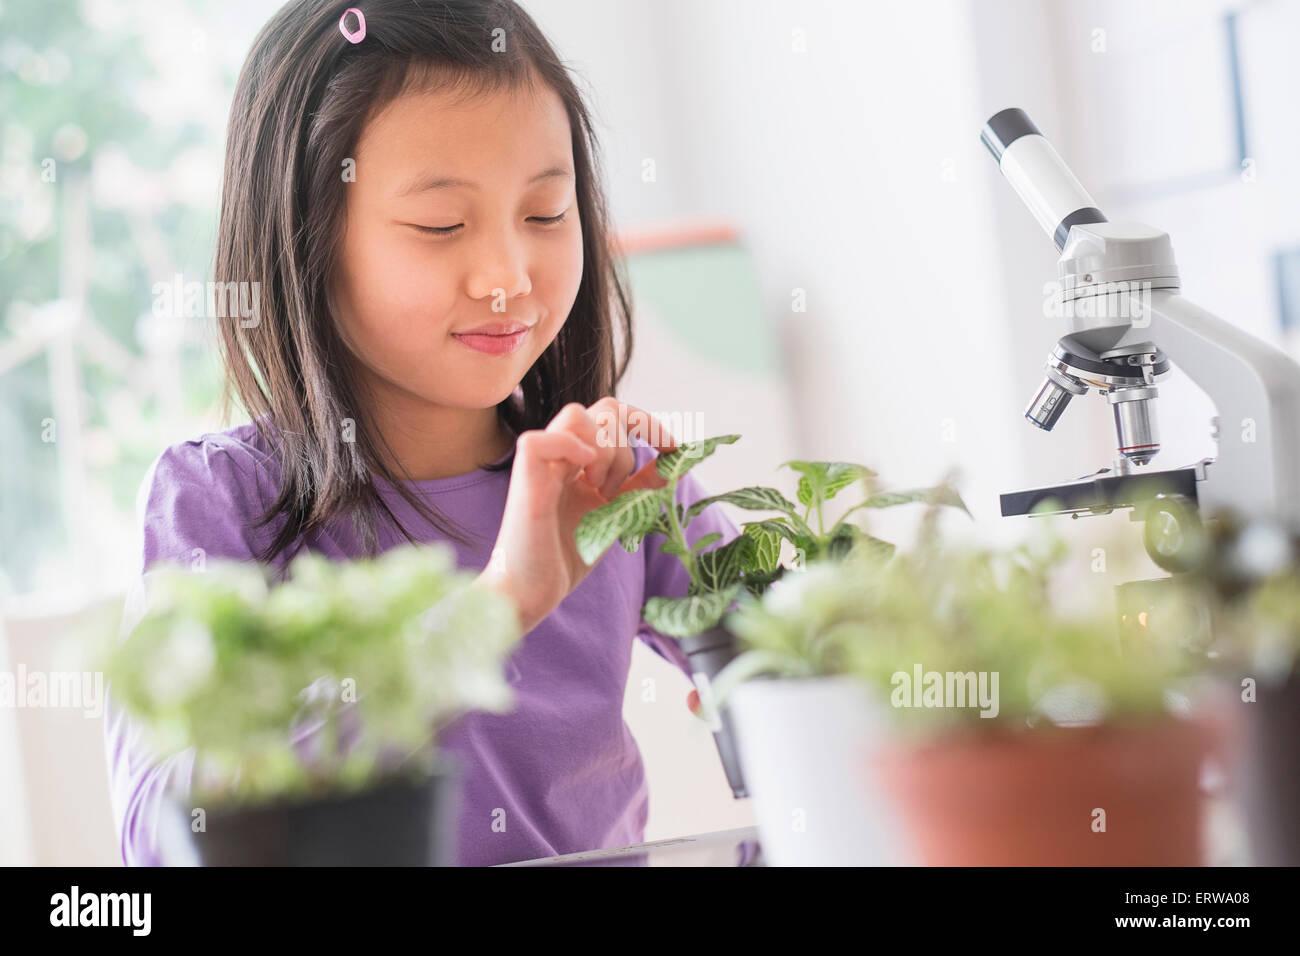 Chinese student examining plants in science lab Stock Photo